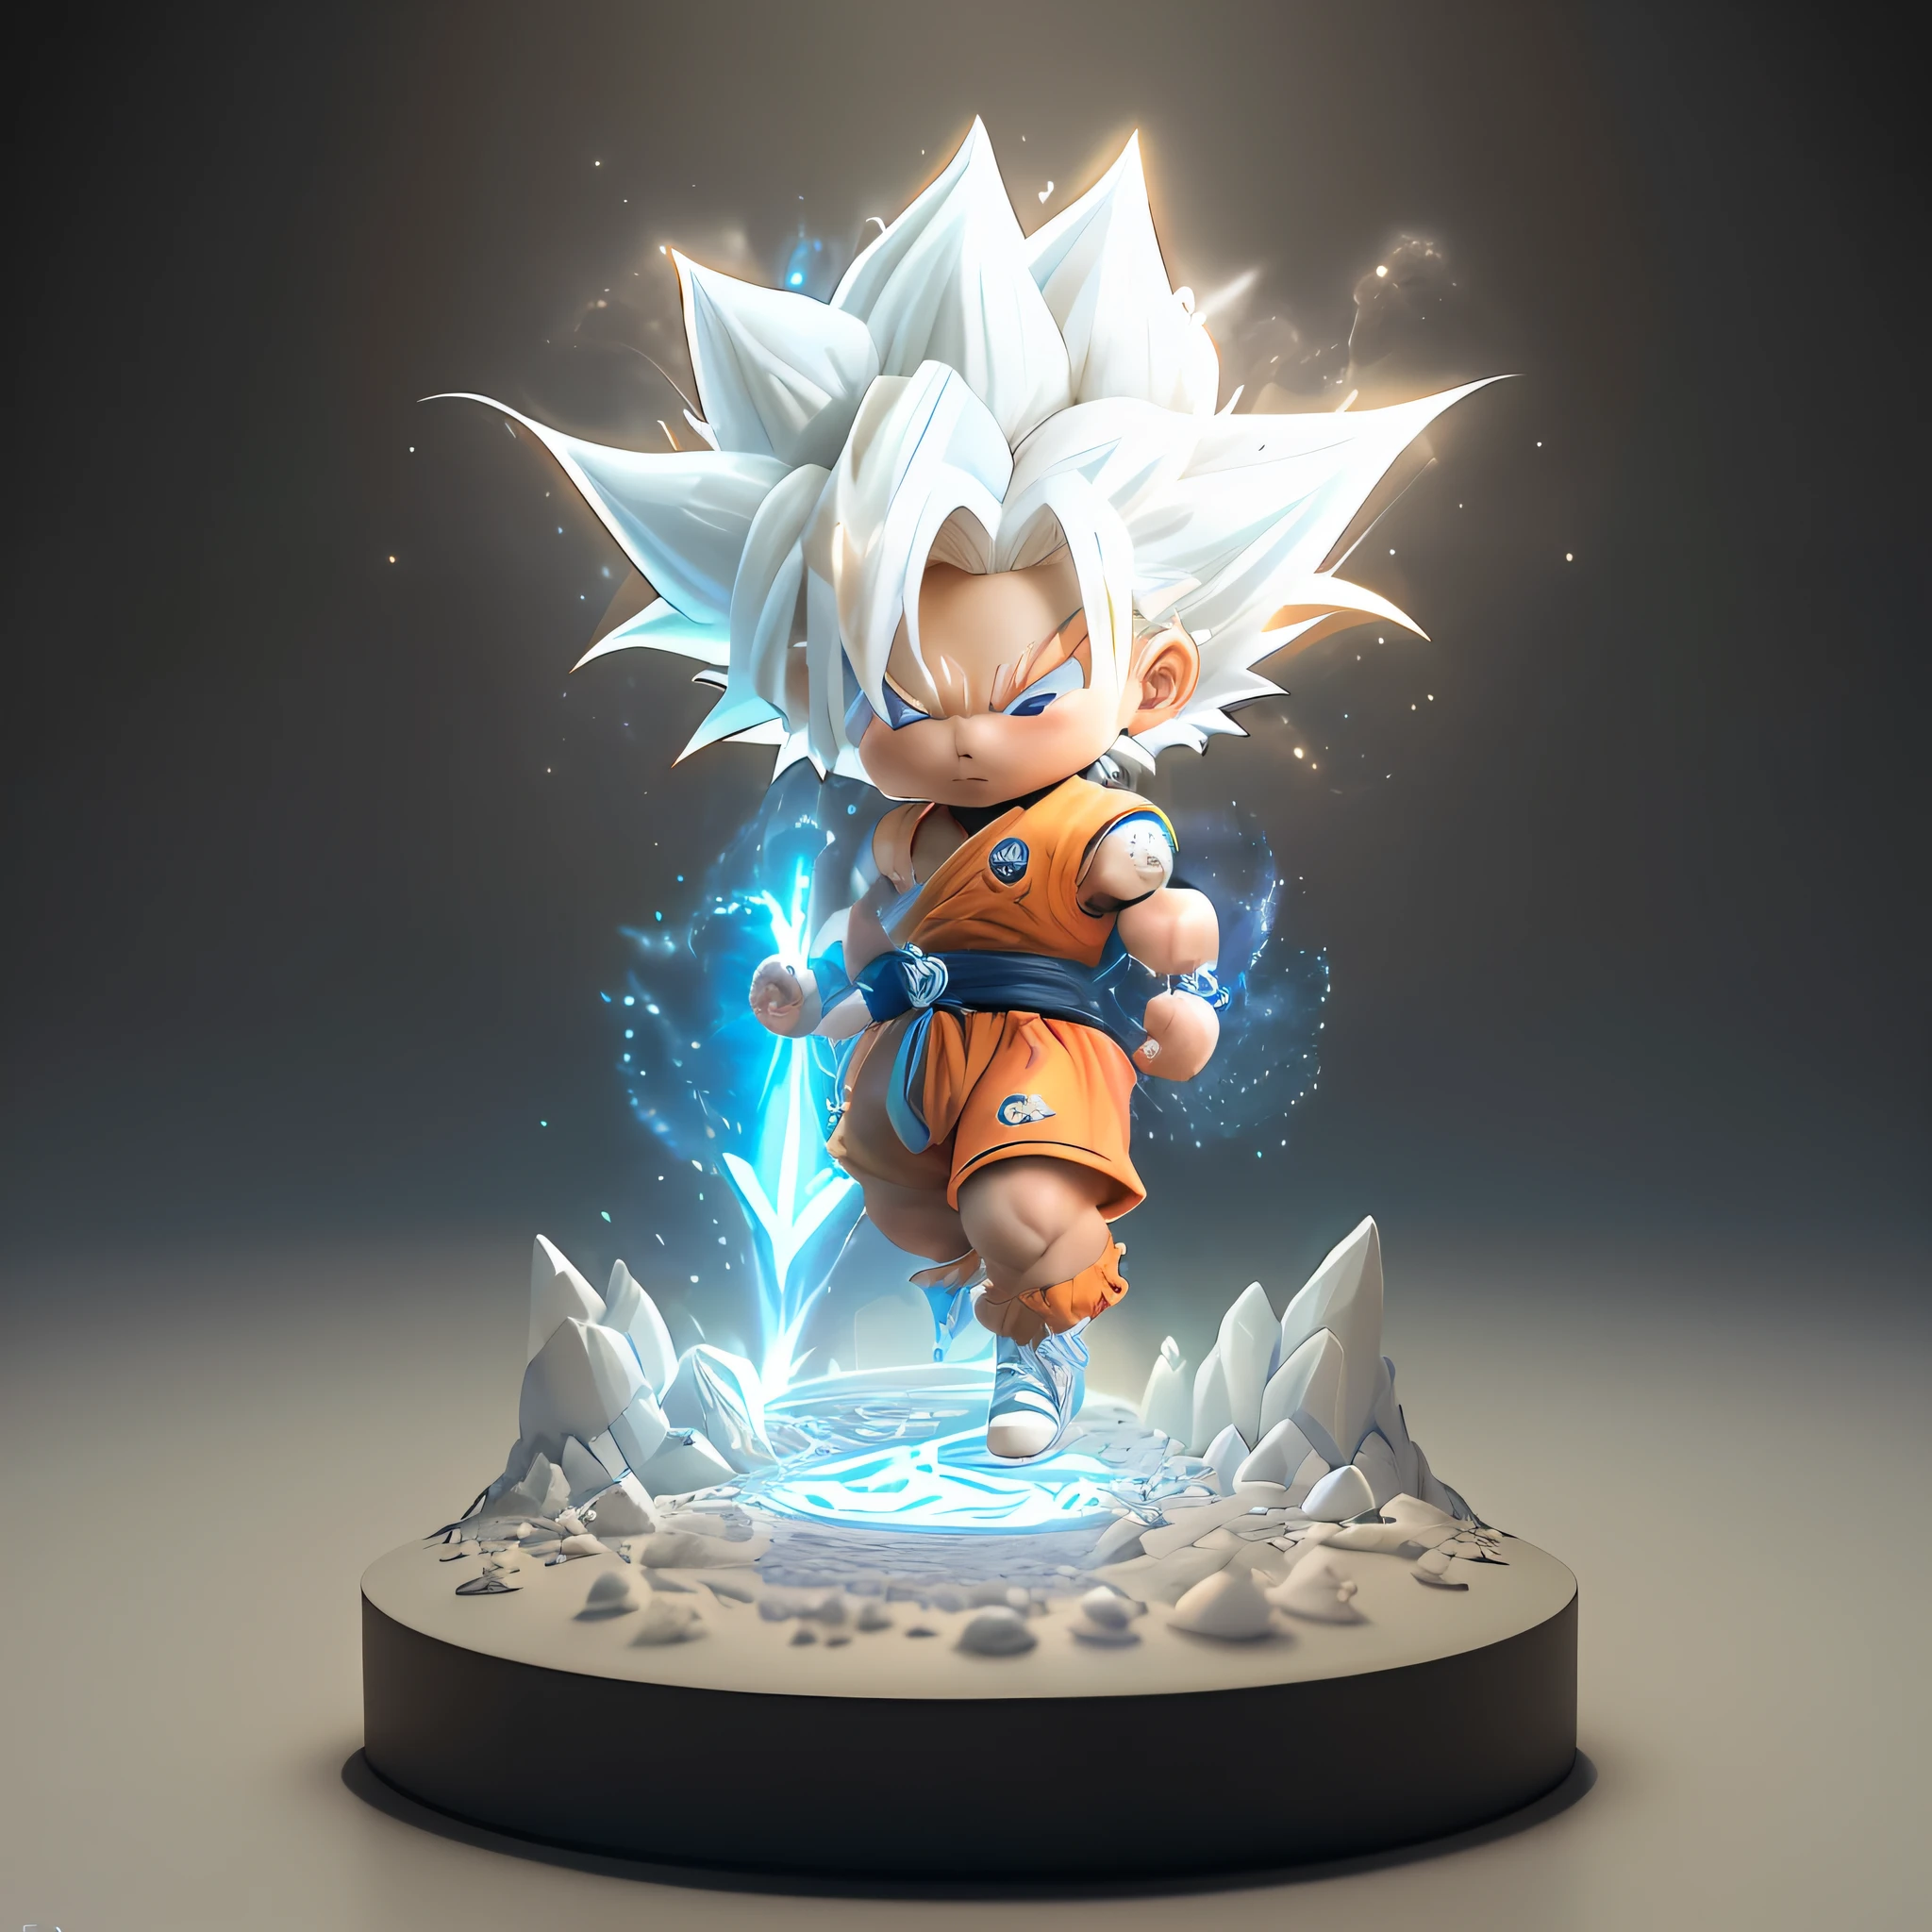 Goku, super saiyan, exquisite hair, arm depiction, white and blue hair body, exquisite shoes, eye depiction, exquisite hair, popmart blind box, clay texture, stepping on the land, black and white background, natural lighting, most good quality, super detail, 3D art, c4d, OC renderer, 3D rendering, 8k